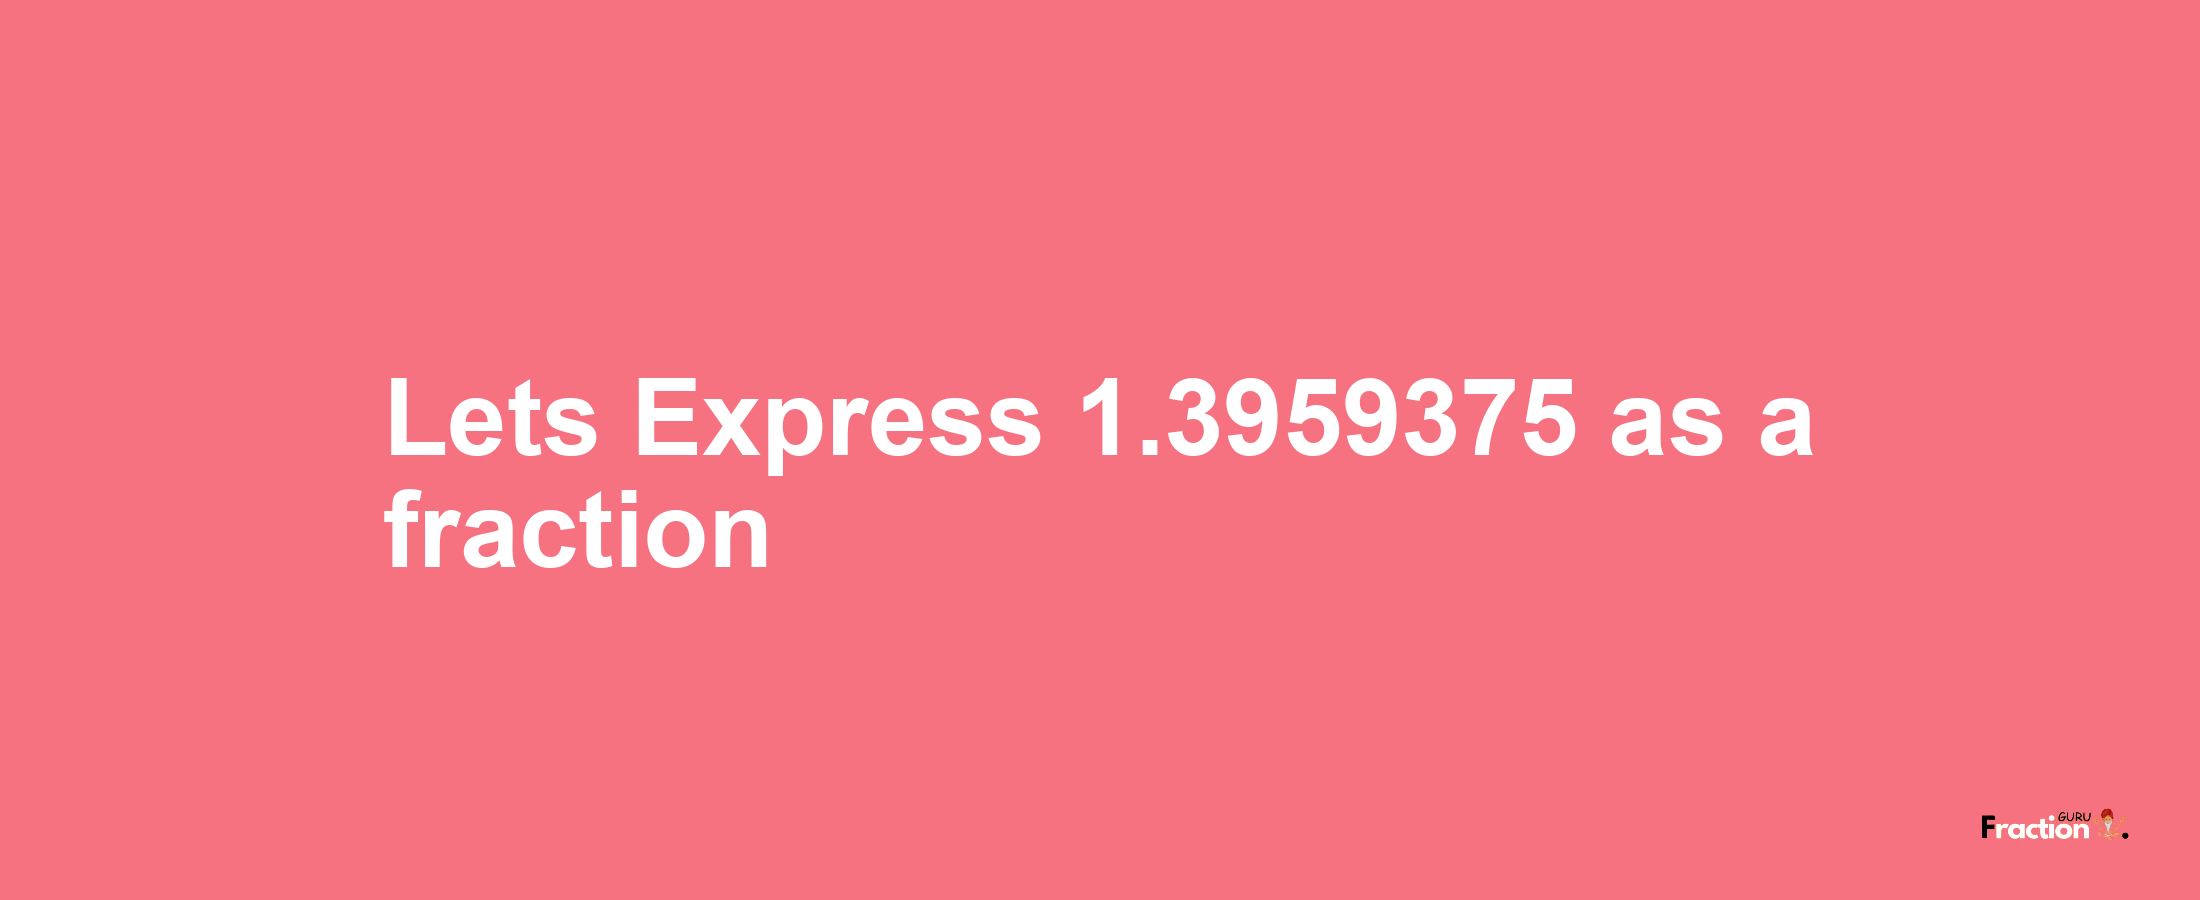 Lets Express 1.3959375 as afraction